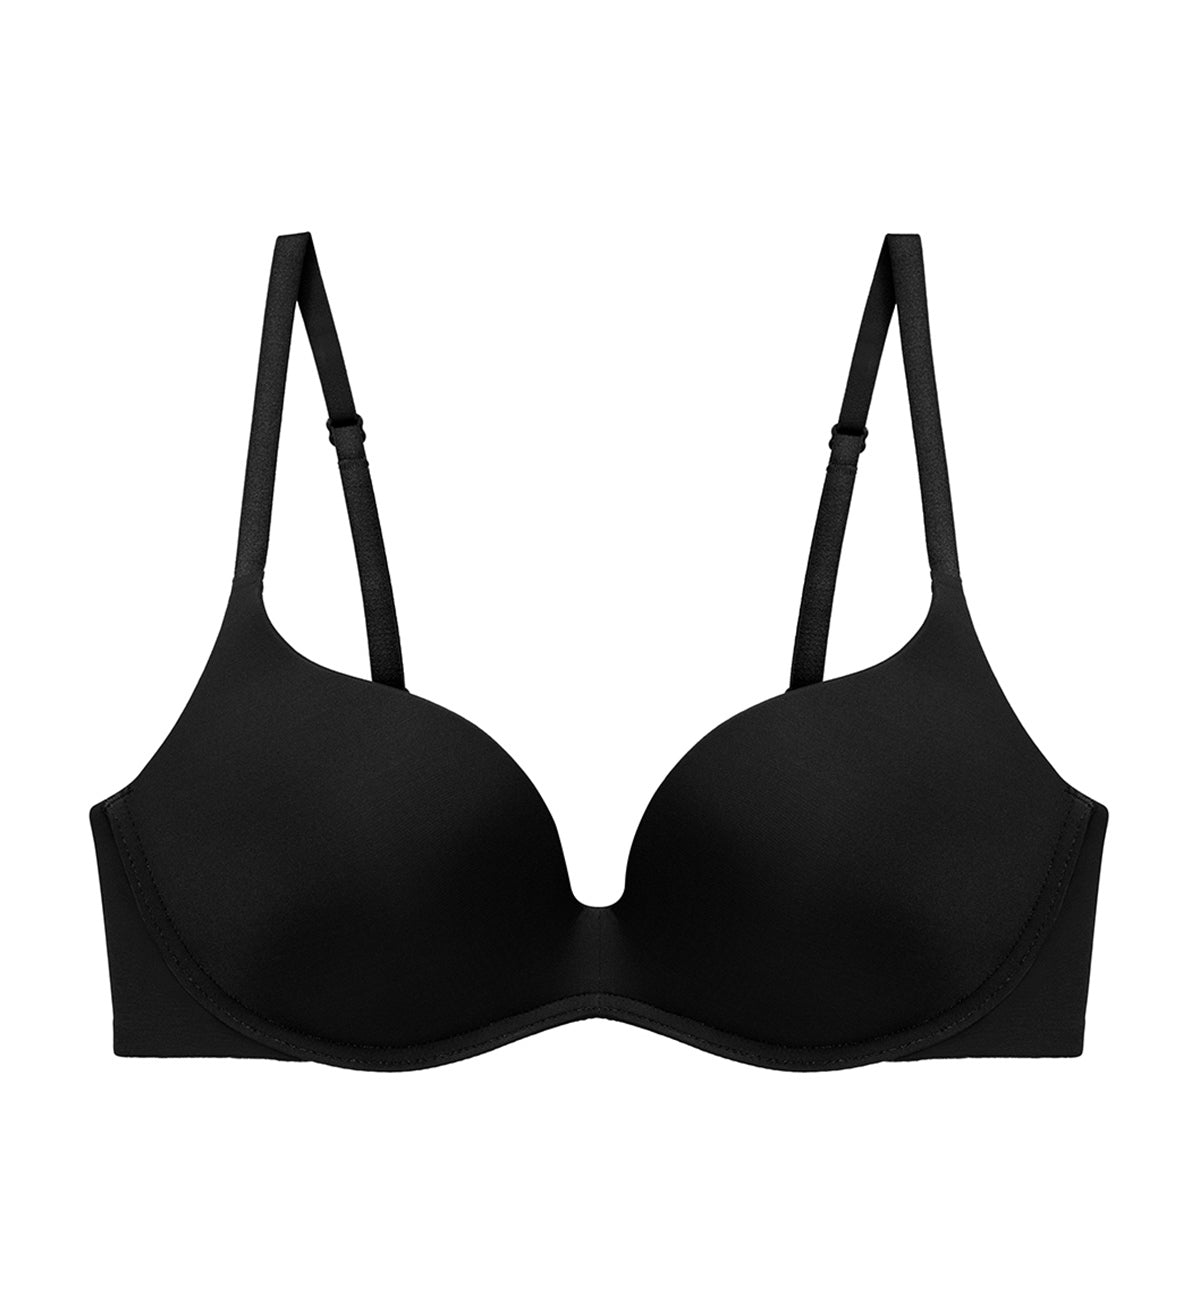 Maximizer 819 Non-Wired Push Up Bra in Graphite | Triumph Hong Kong